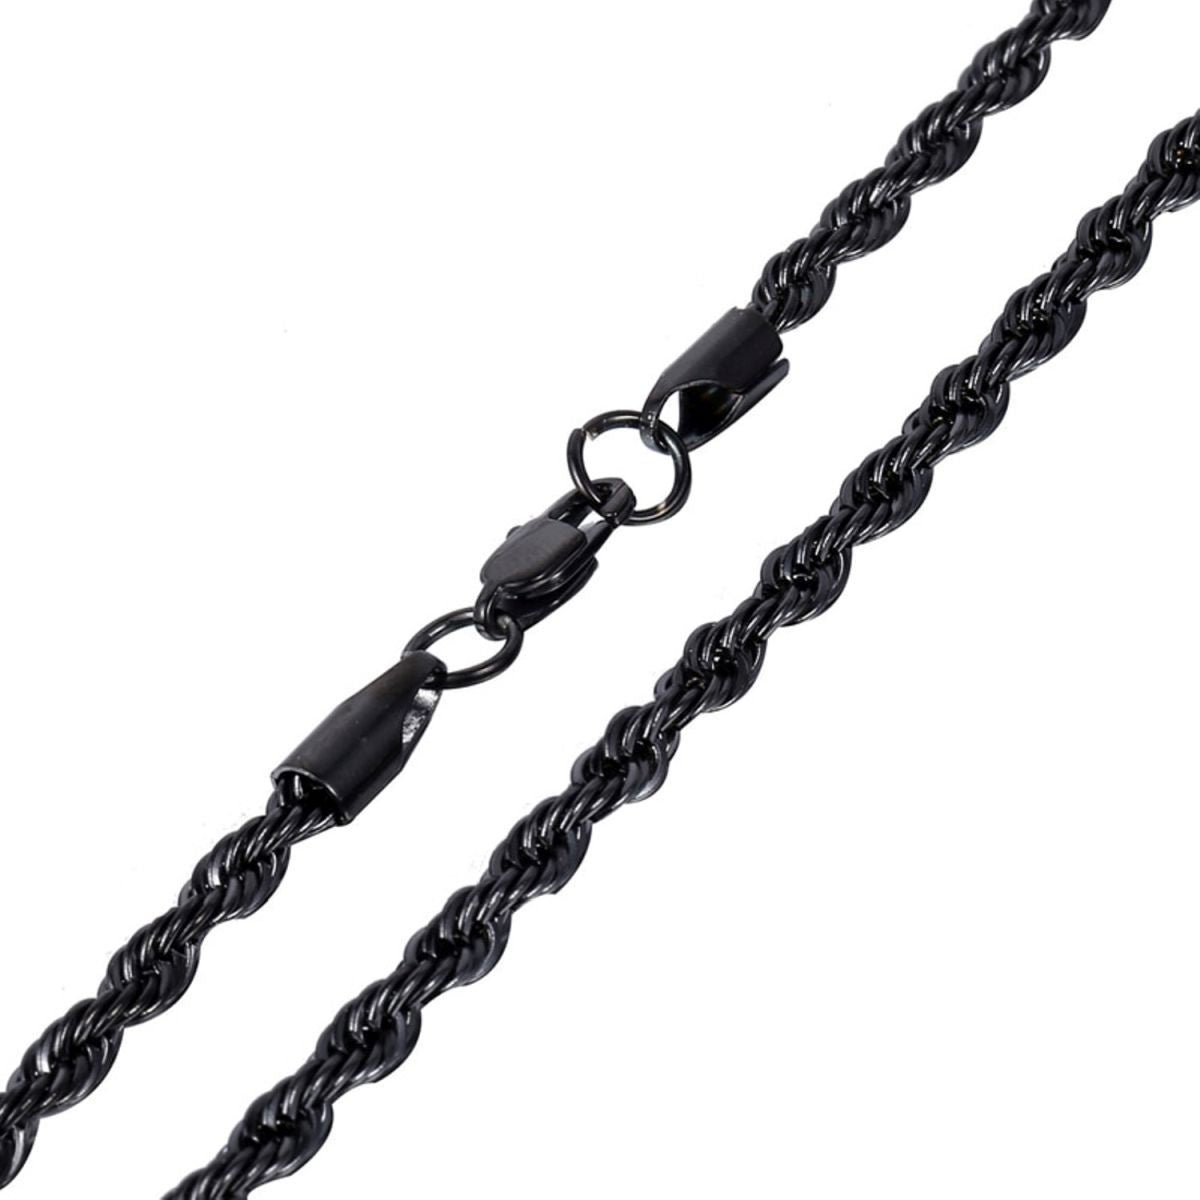 INOX Jewelry NSTC026K-24 Super Rope Stainless Steel Chain Black - 3 mm & 24 in.